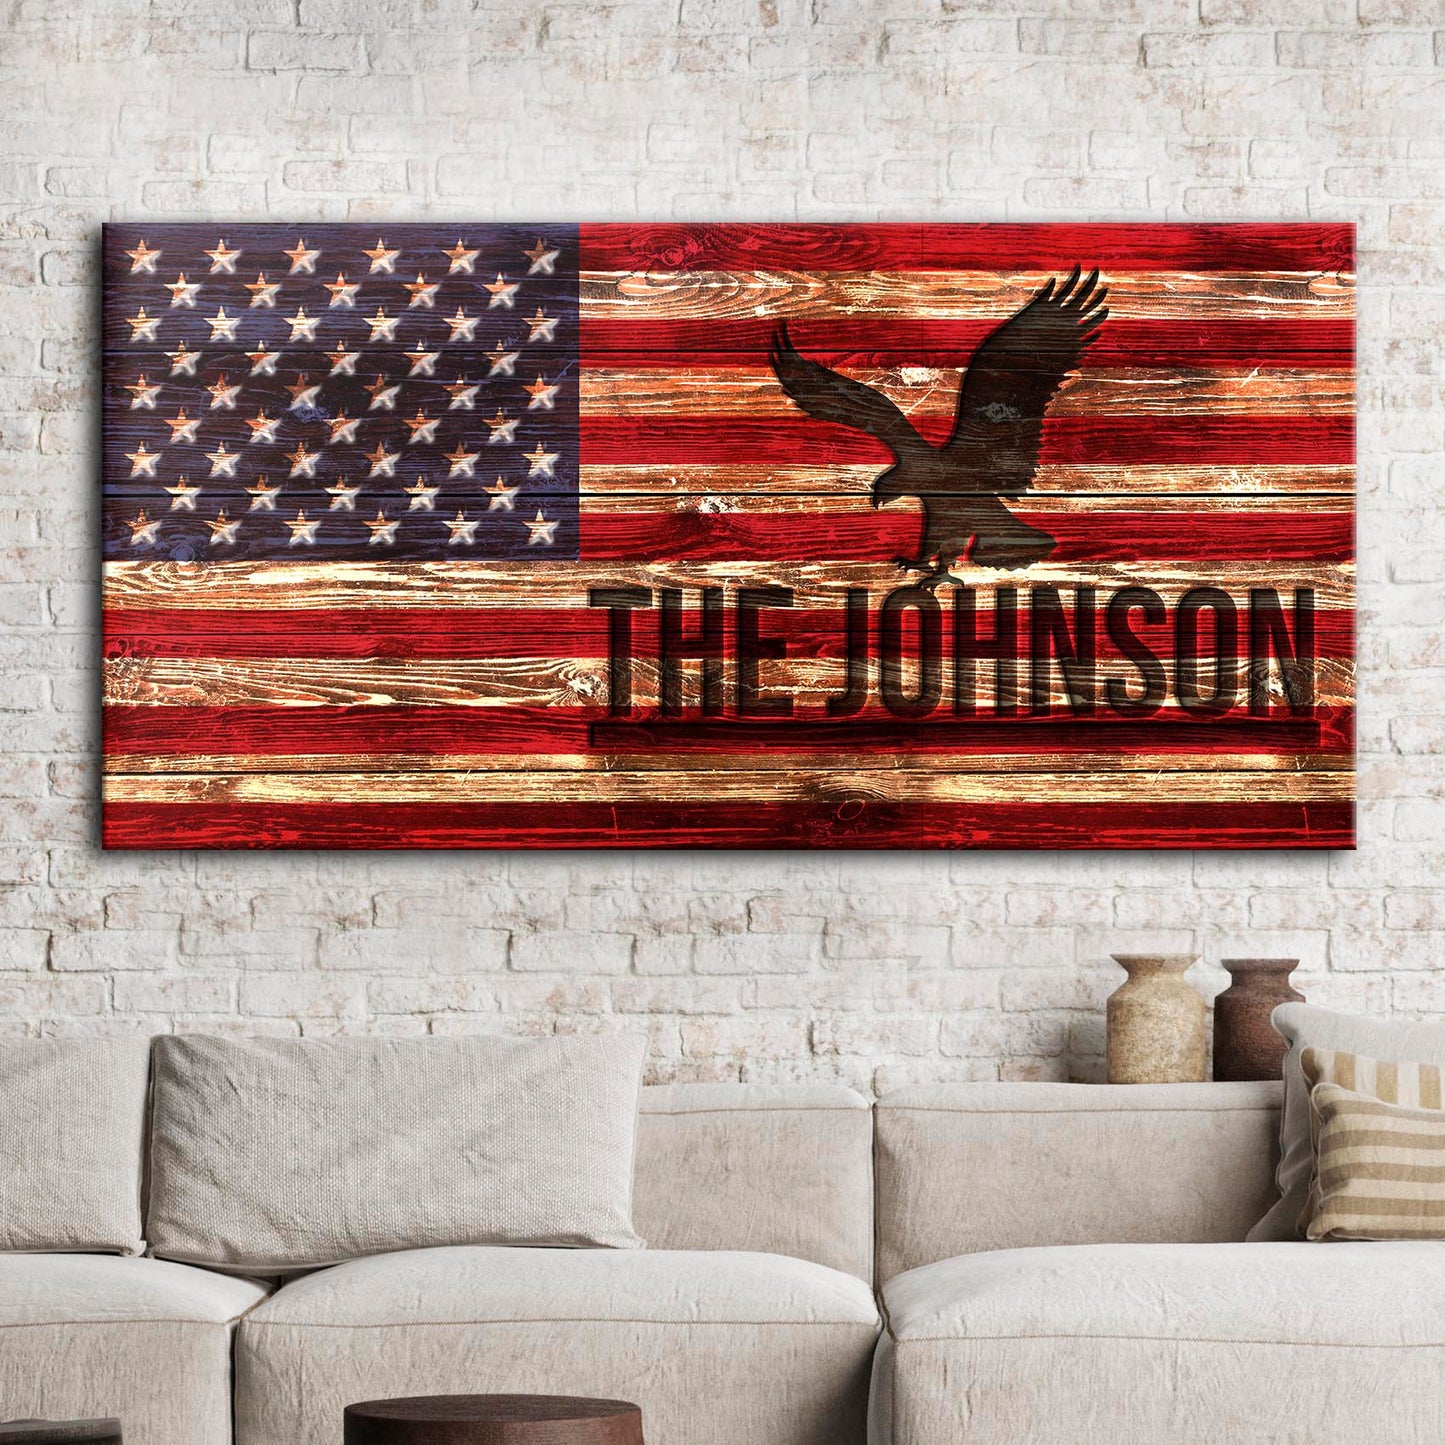 Rustic American Flag Sign - Image by Tailored Canvases